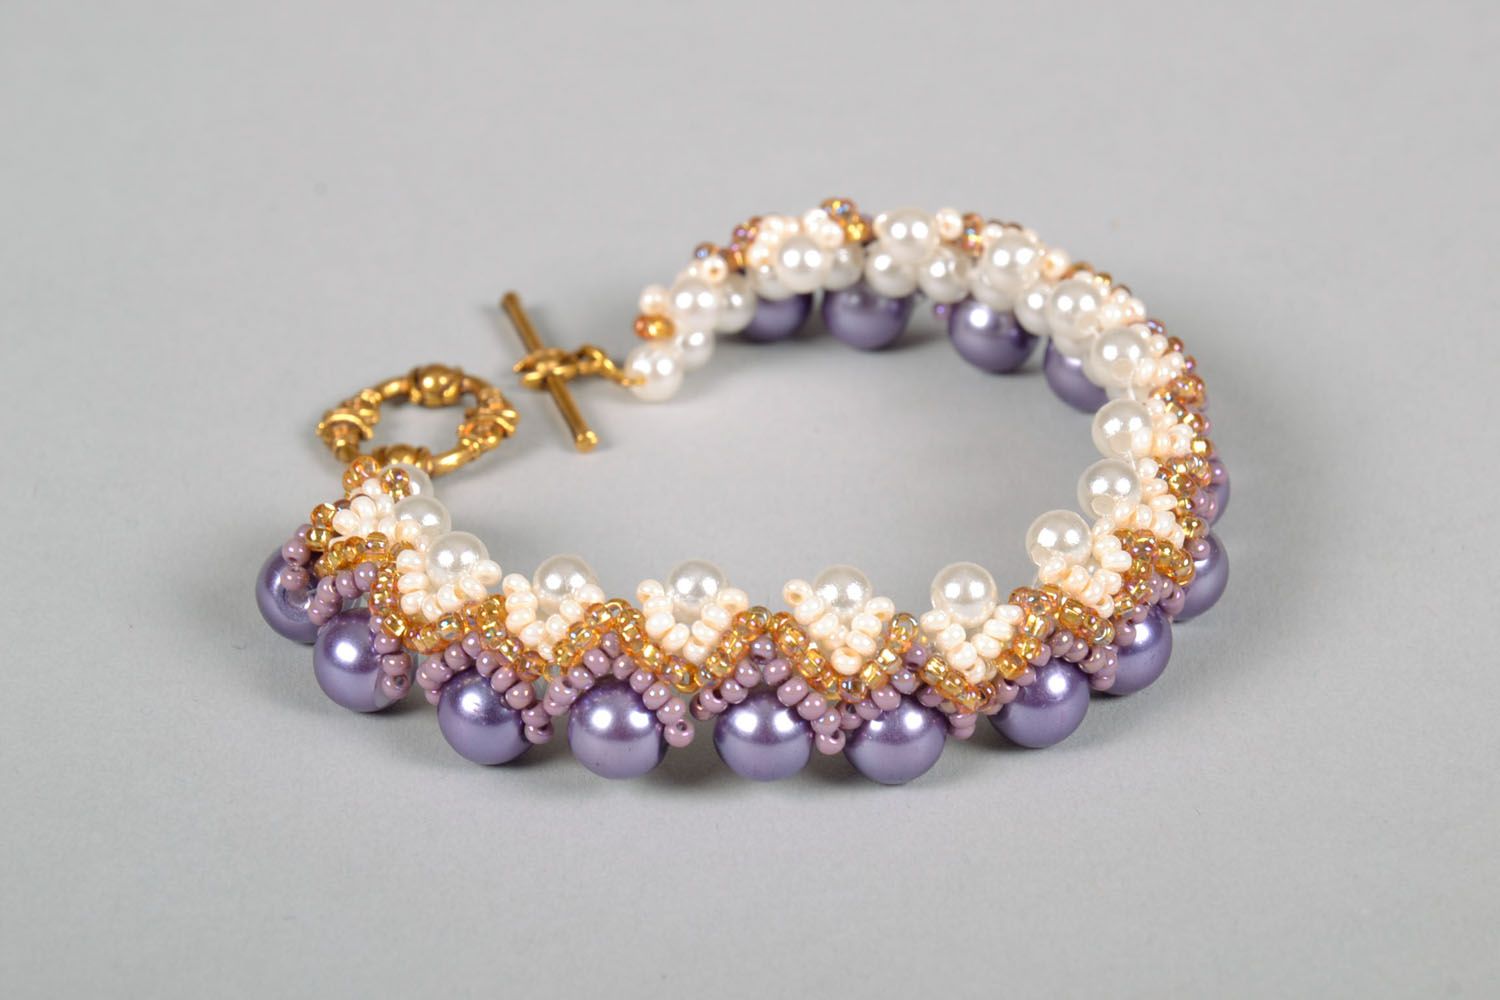 Bracelet made of beads and artificial pearls photo 4